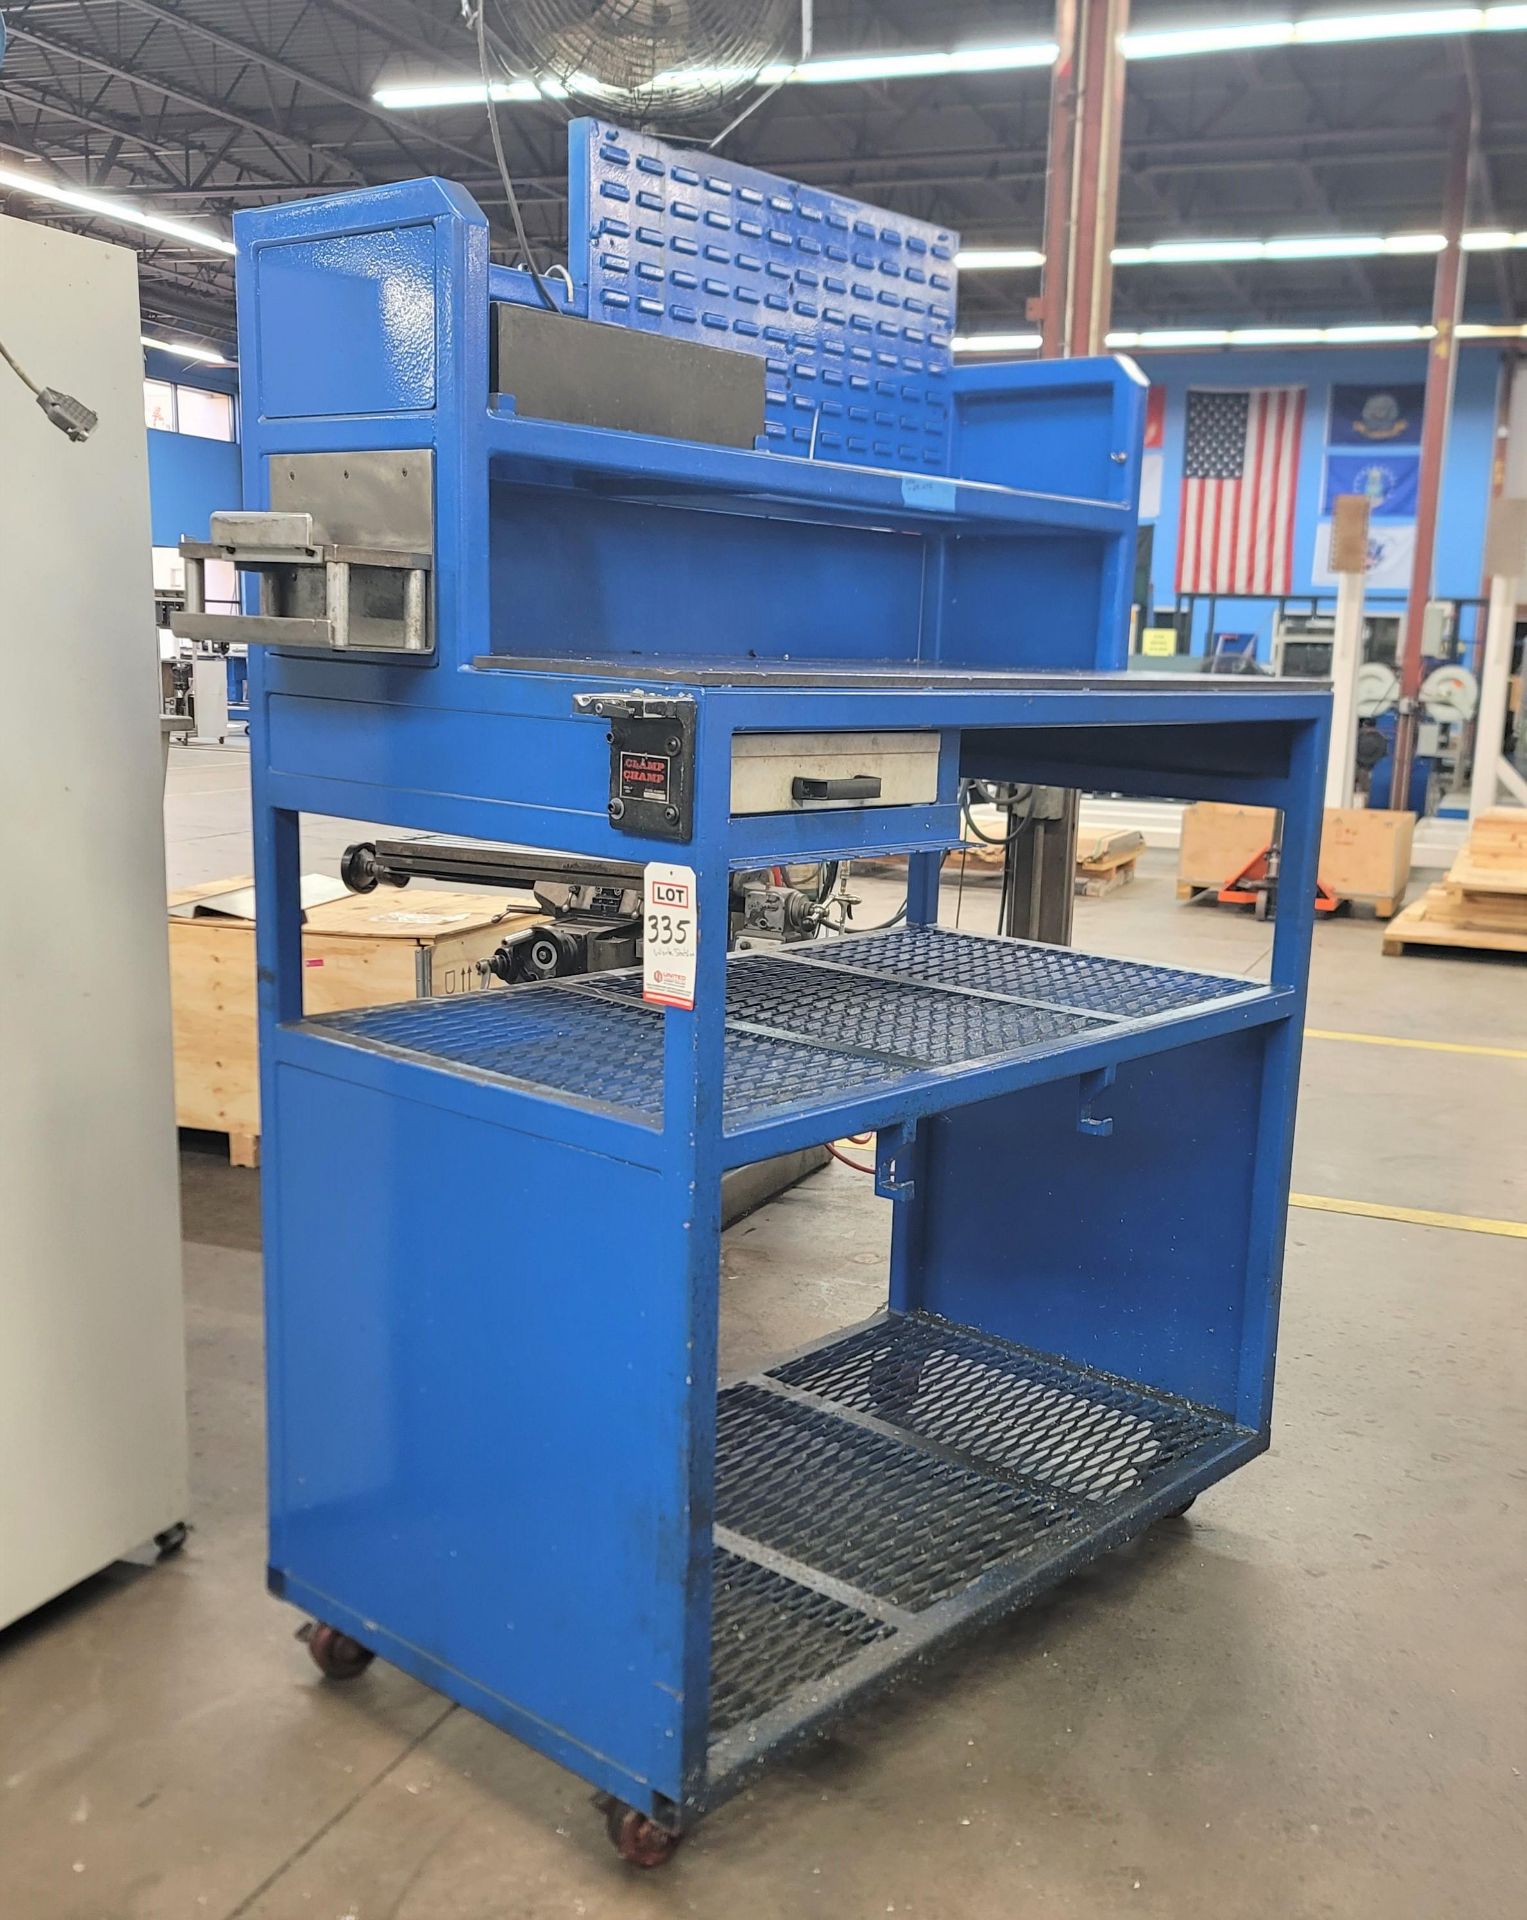 LARGE STEEL WORKSTATION, 5' X 34" X 90" TOTAL HT, W/ 18" MAXX AIR FAN, CLAMP CHAMP CNC TOOL HOLDER